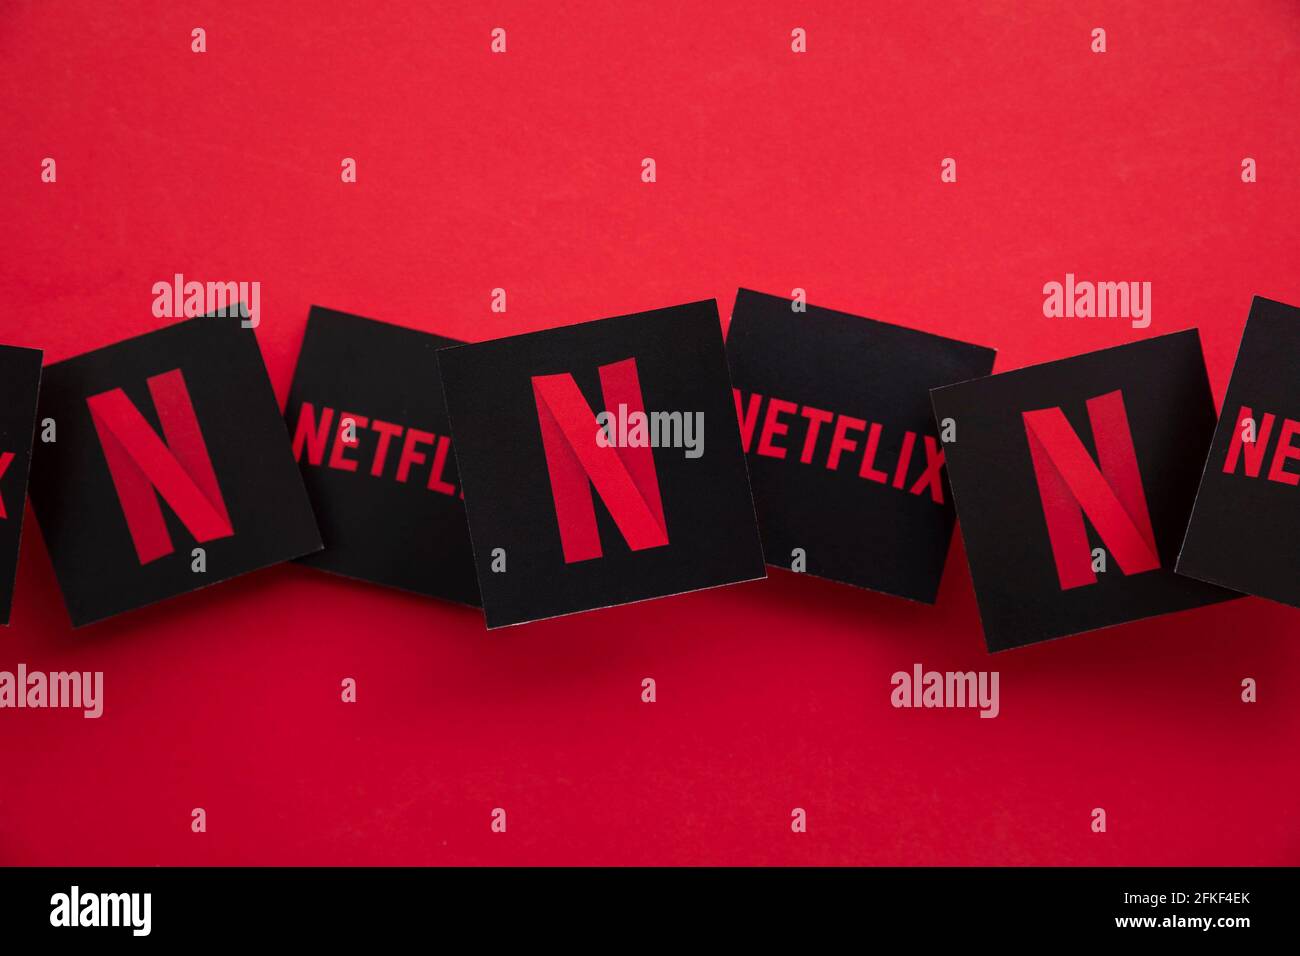 LONDON, UK - APRIL 2021: Netflix on demand tv and movie steaming service logo Stock Photo